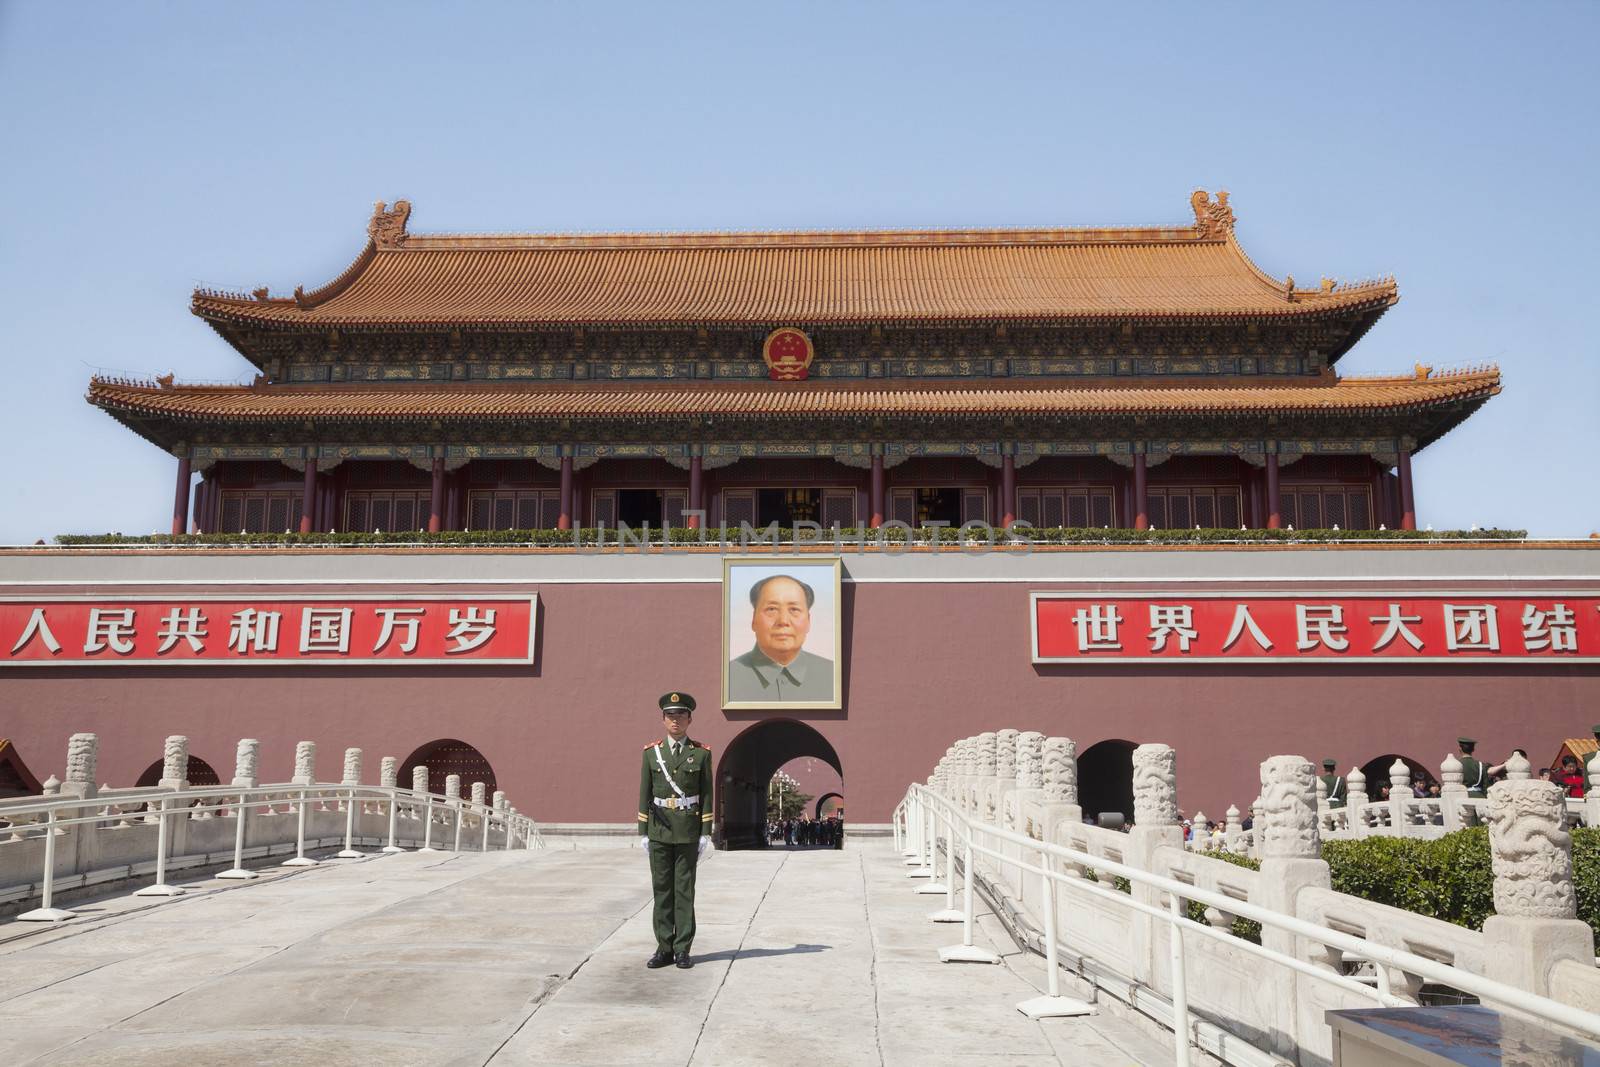 Tiananmen Square, Gate of Heavenly Peace with Mao's Portrait and guard, Beijing, China. by XiXinXing